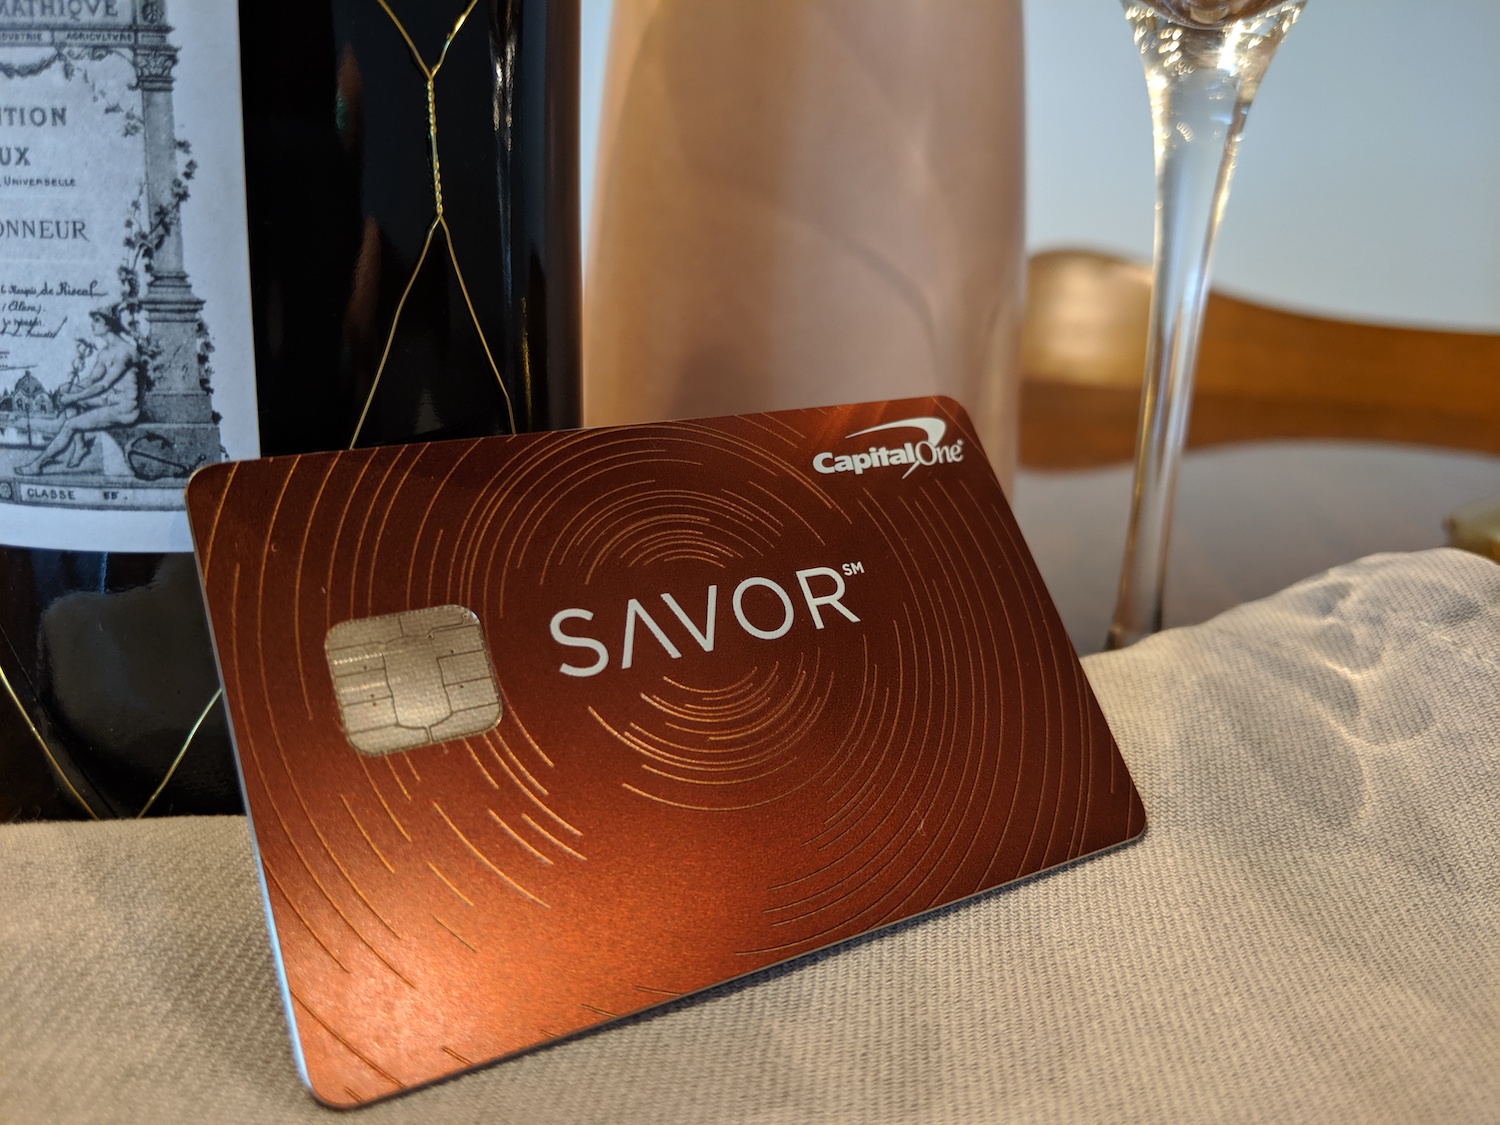 capital one savor credit card review